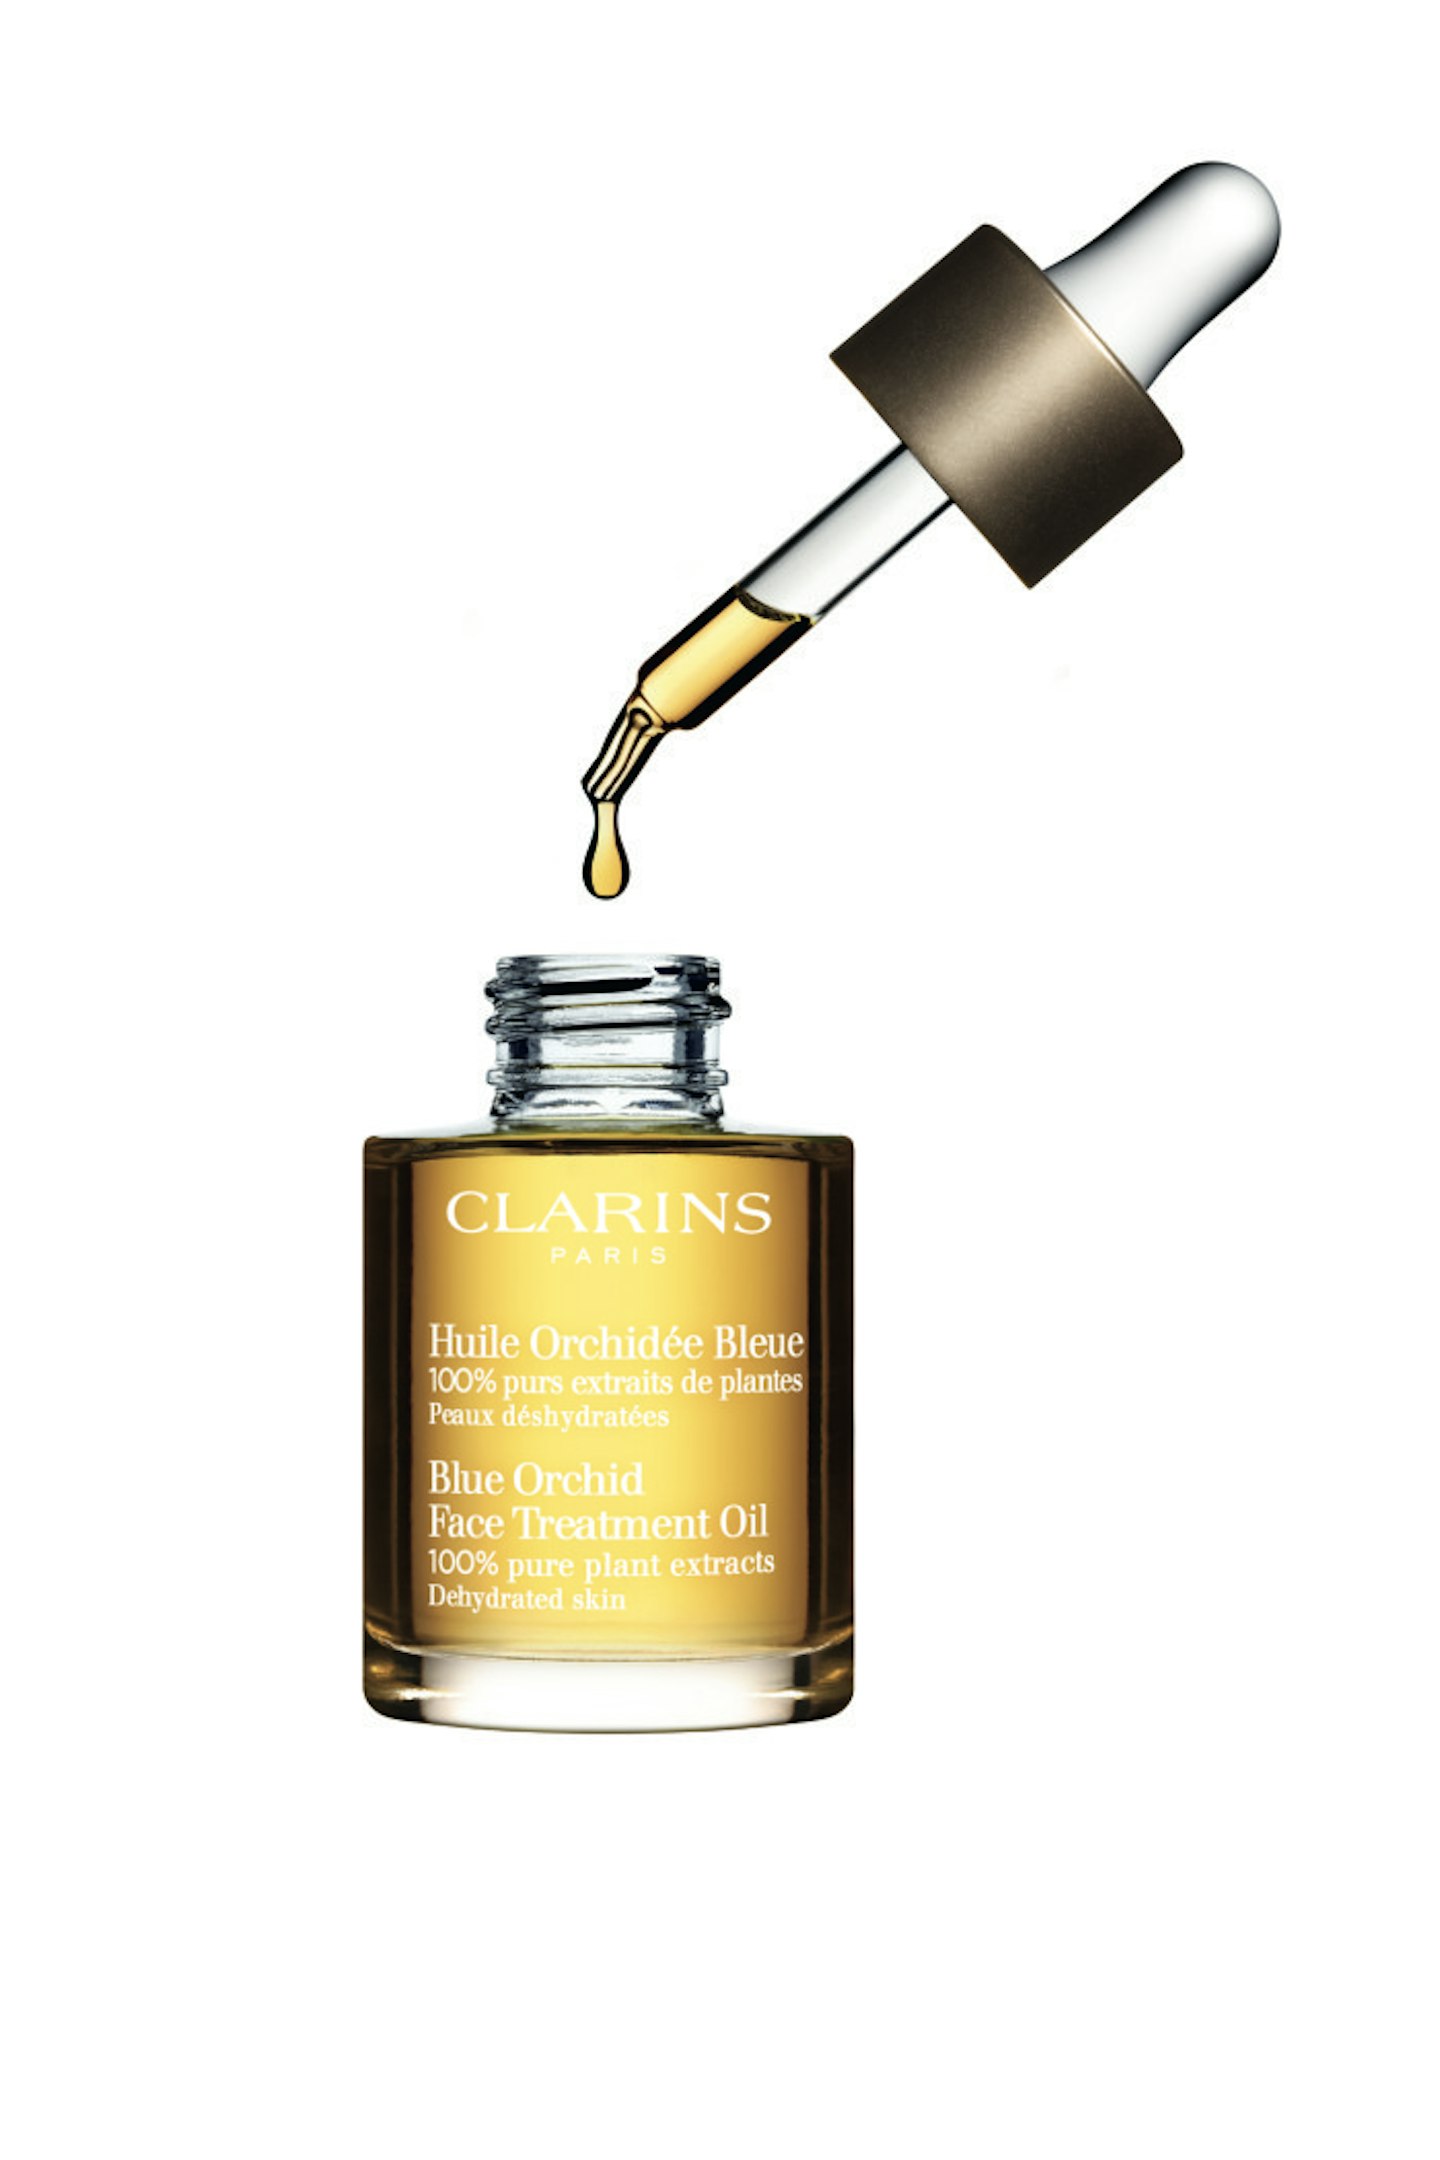 Clarins Blue Orchid Oil, £29.00